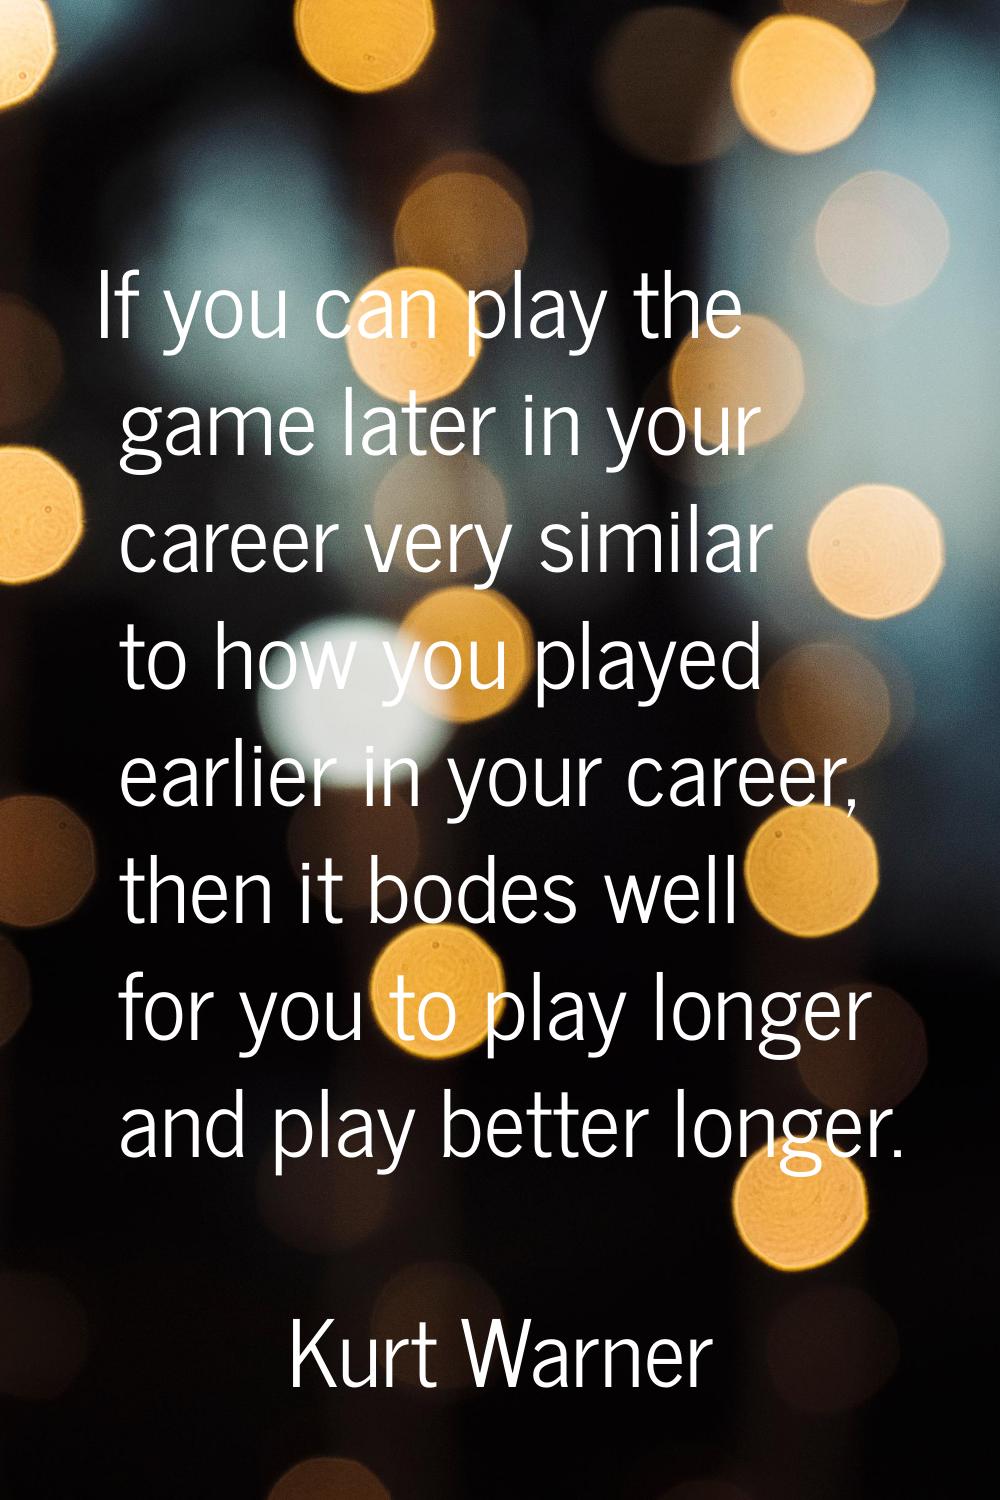 If you can play the game later in your career very similar to how you played earlier in your career